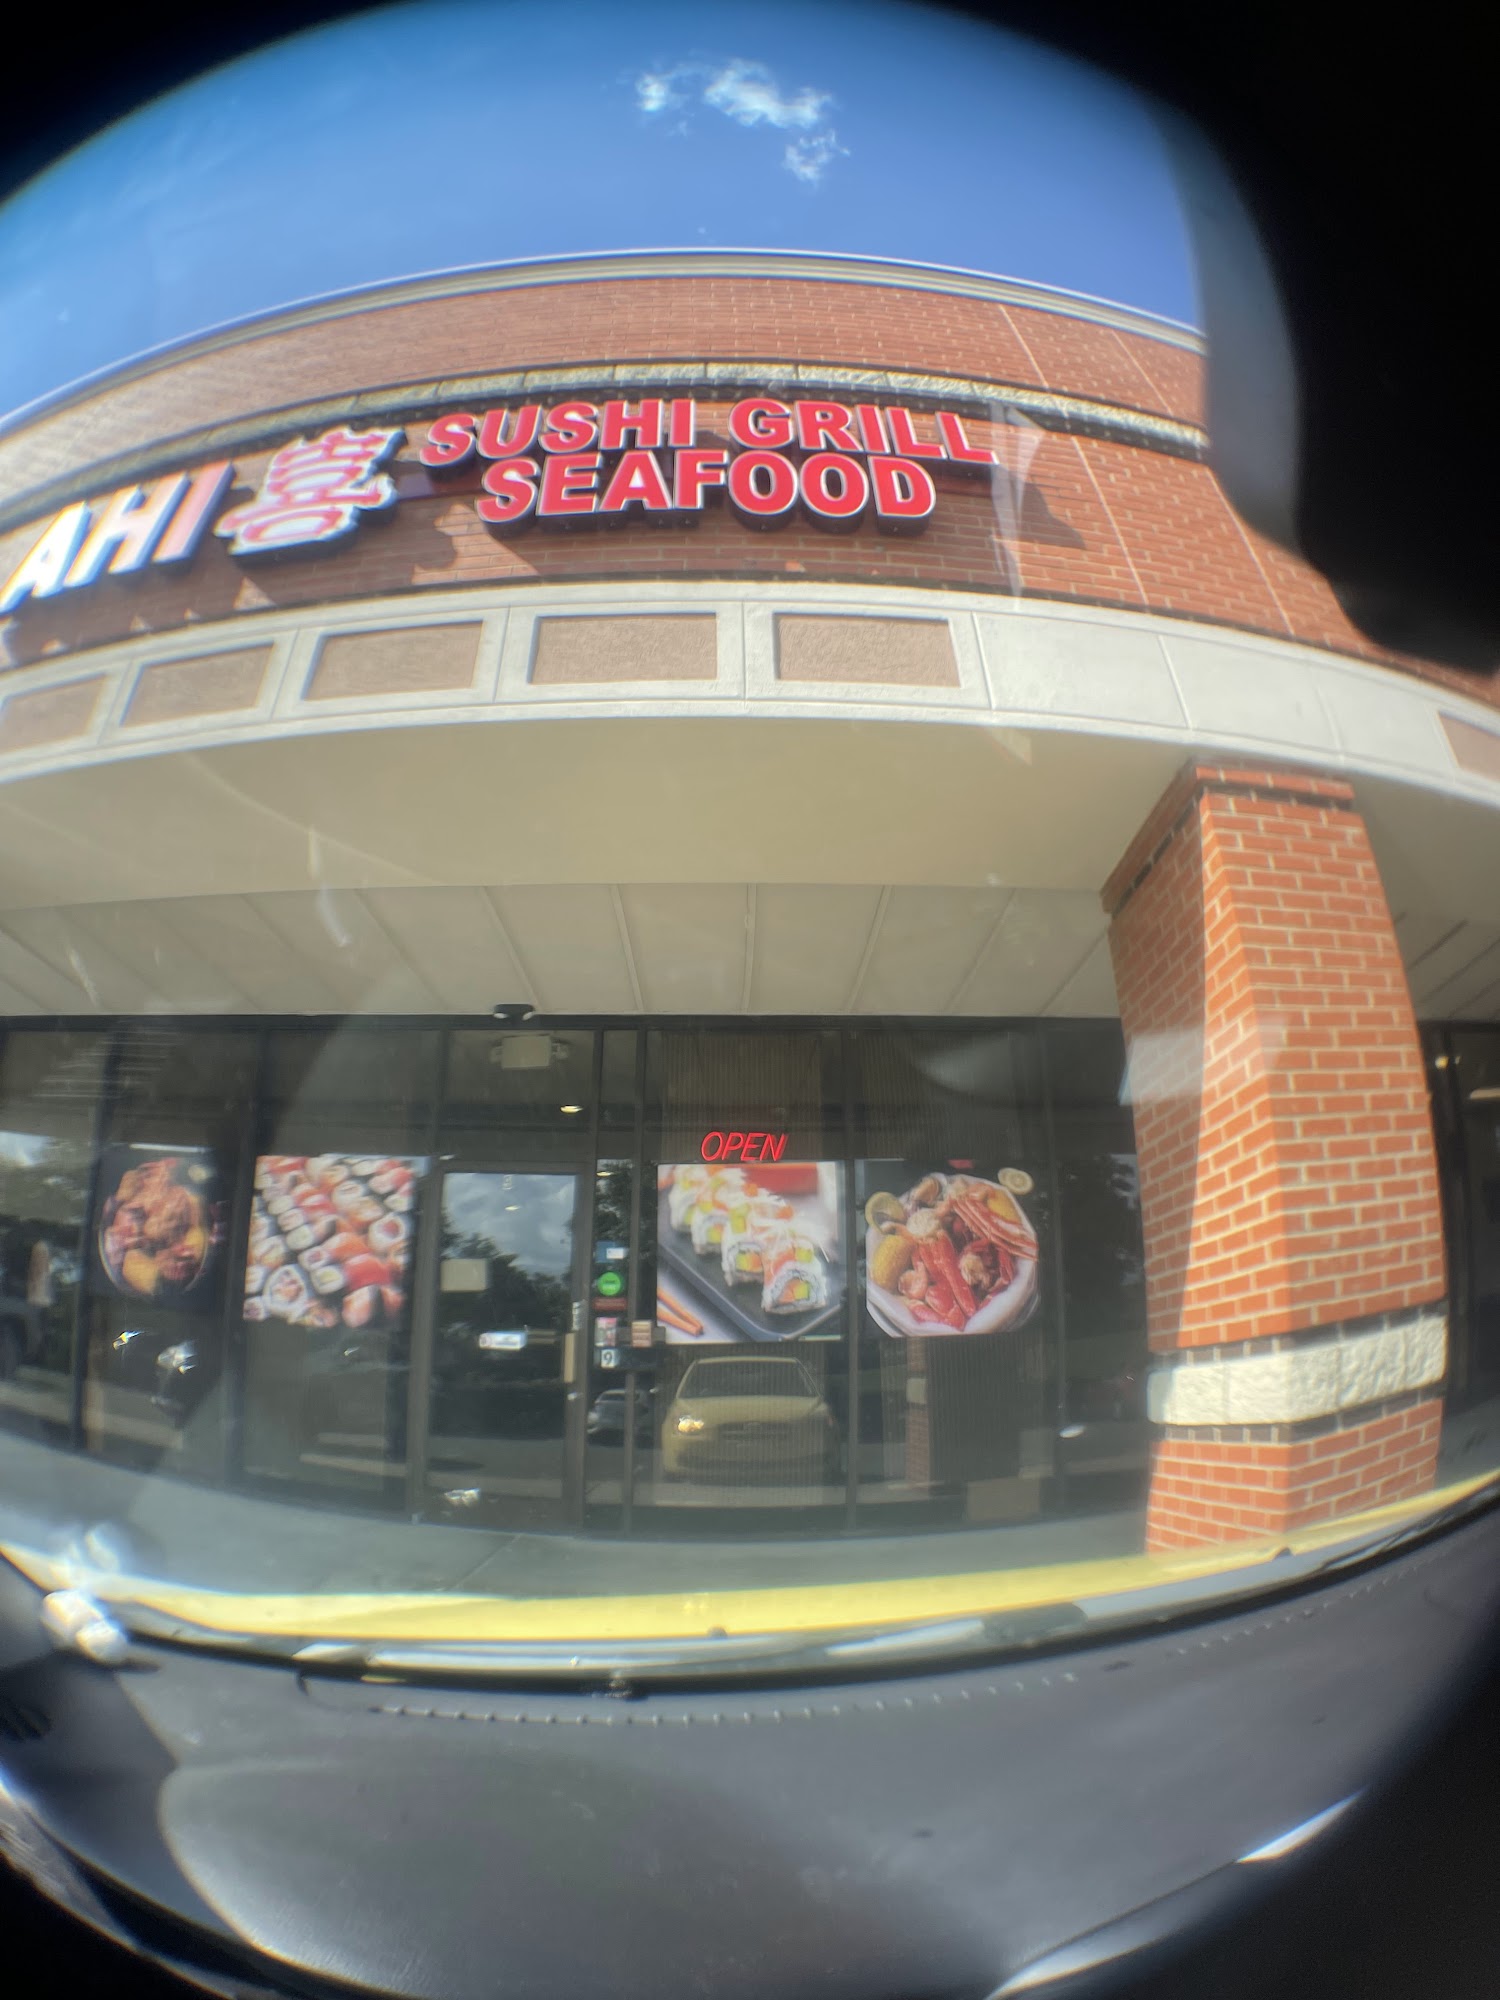 Ahi Sushi, Grill & Seafood - Lakeland / US-64 / Staging Rd